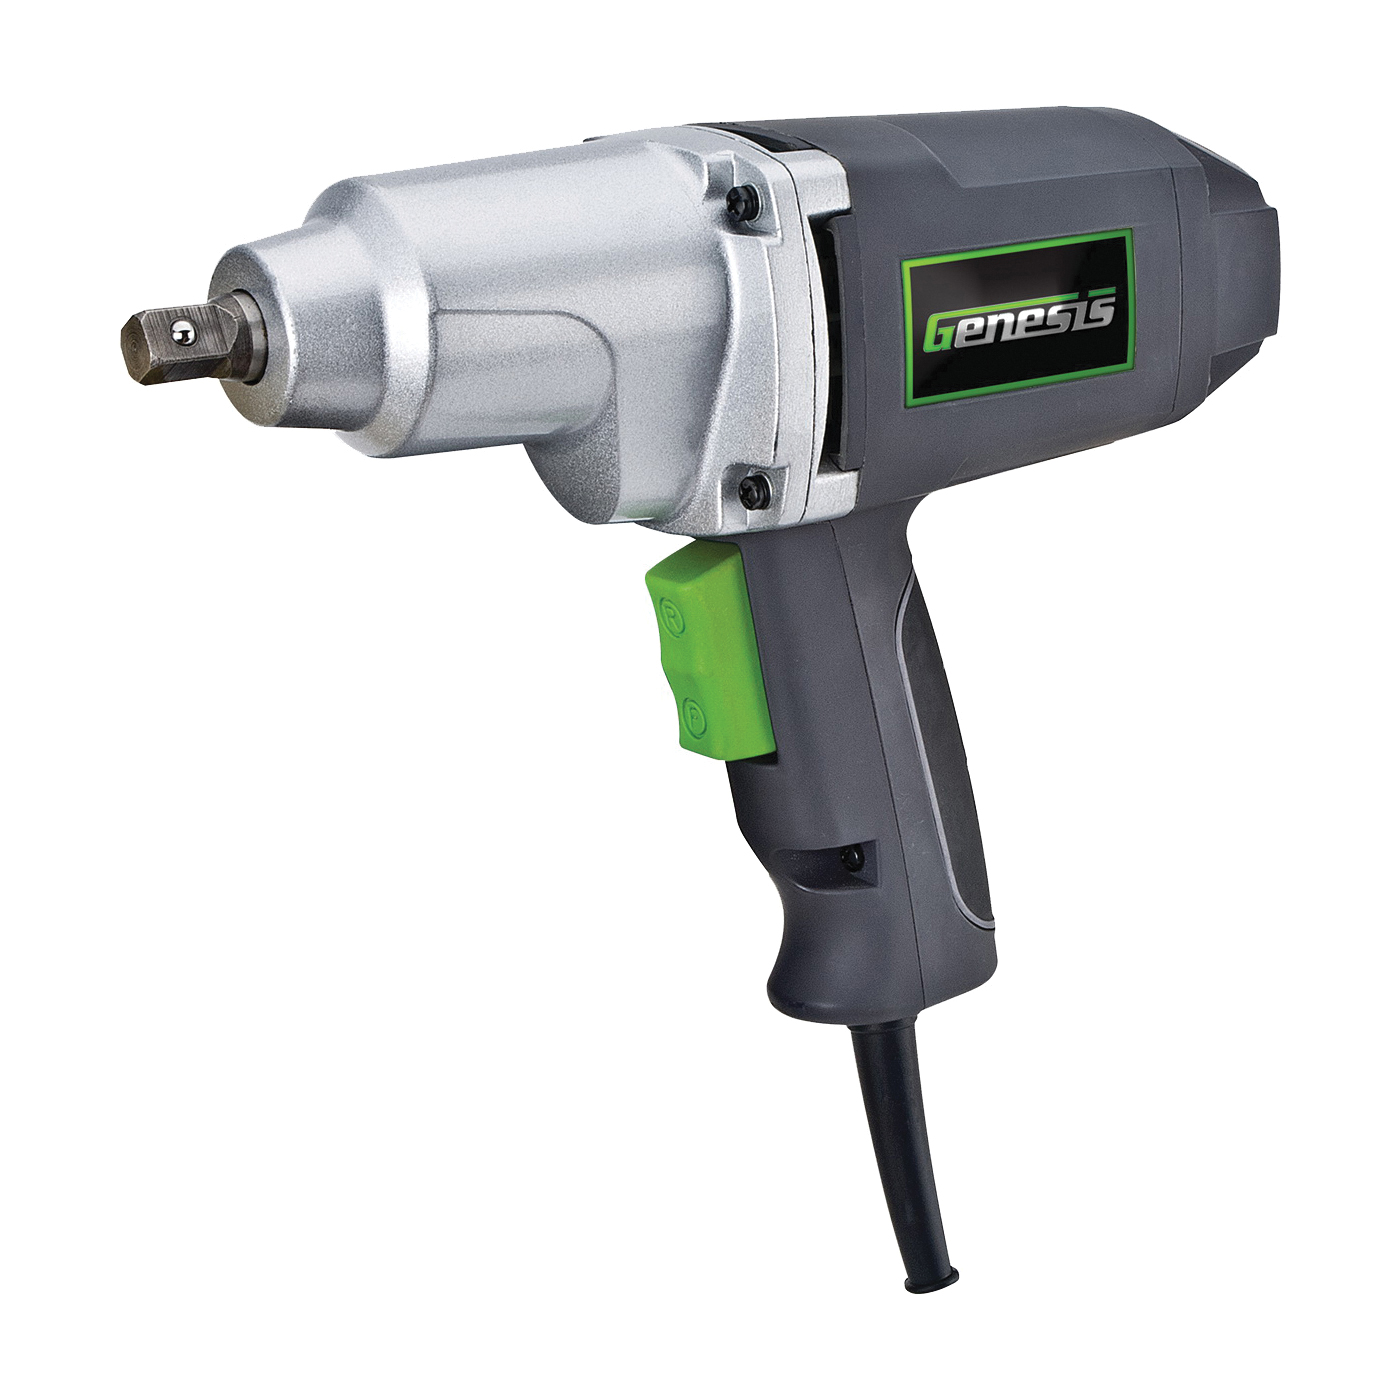 Genesis GIW3075K Impact Wrench Kit, 7.5 A, 1/2 in Drive, Square Drive, 0 to 2700 ipm, 0 to 2100 rpm Speed - 4